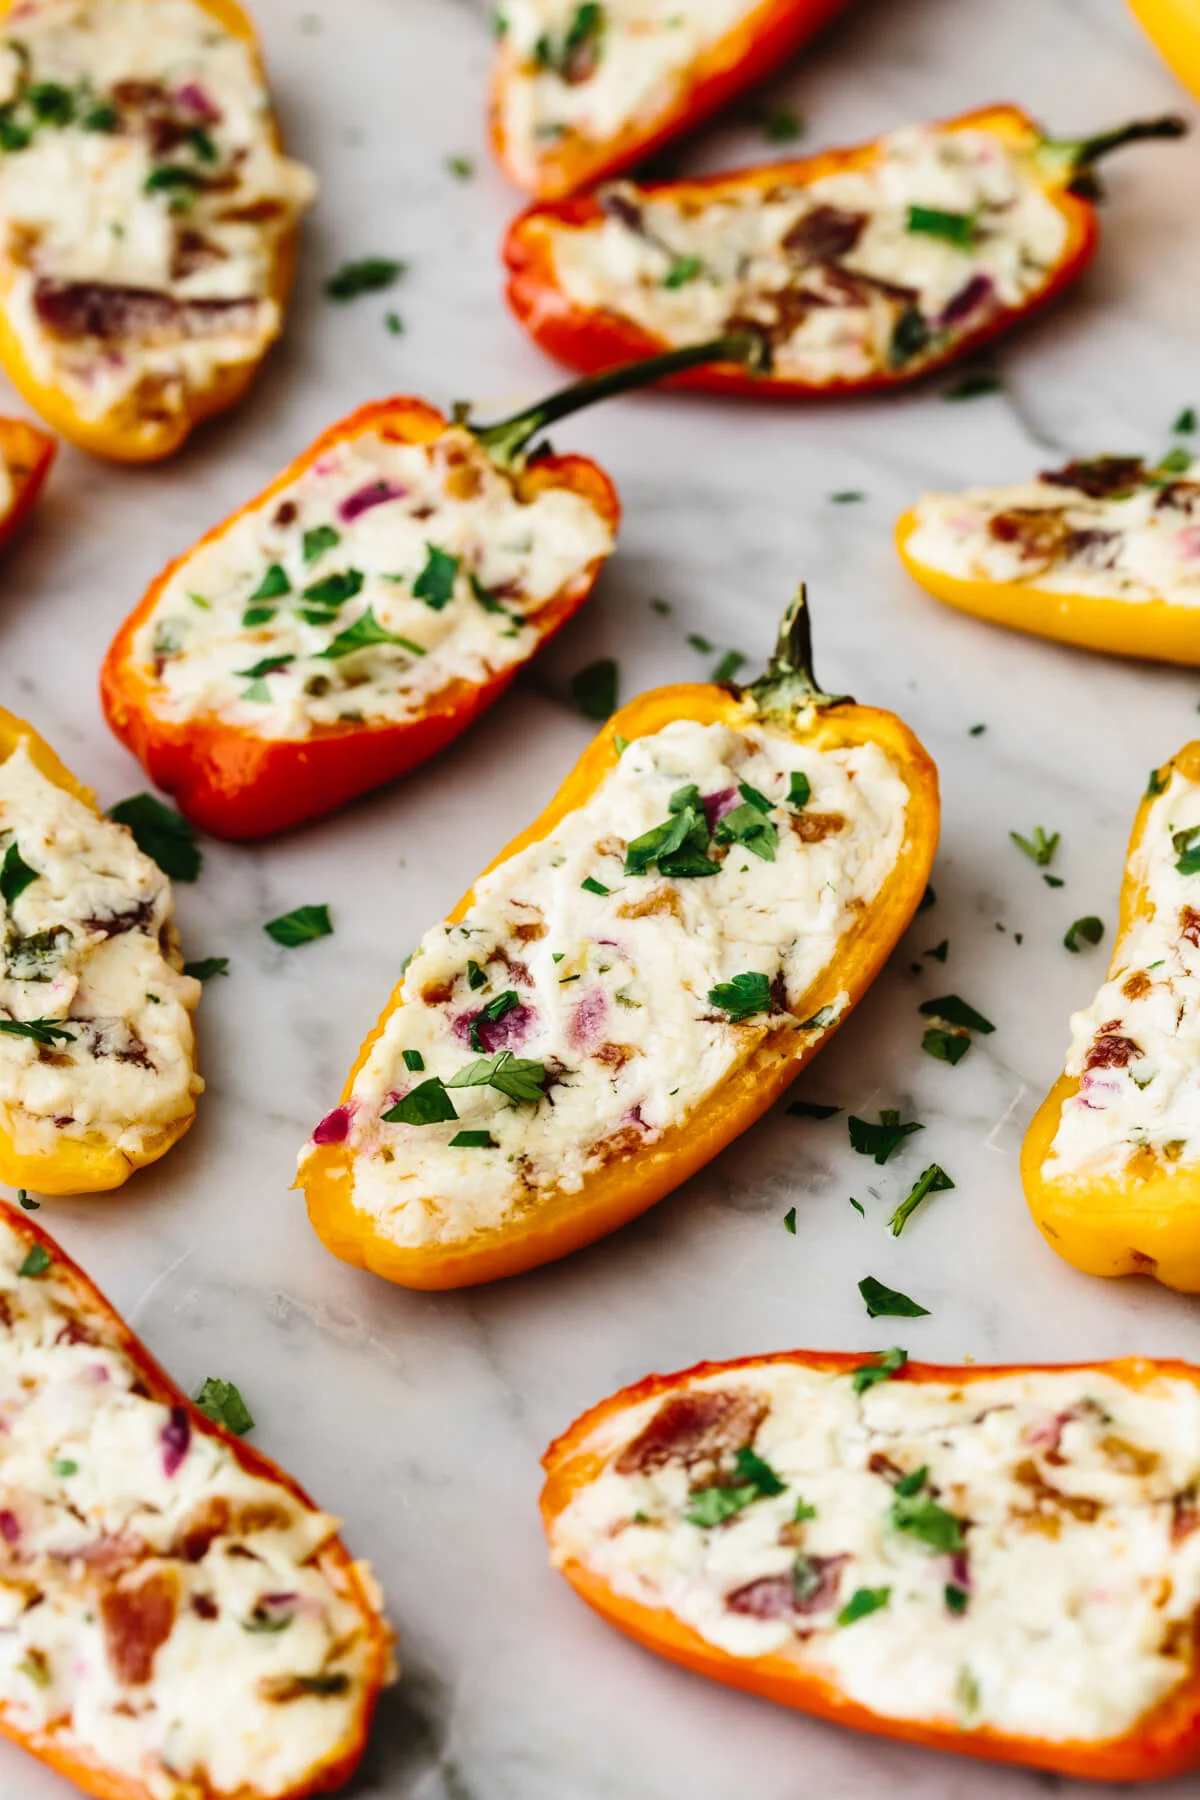 Bacon and Goat Cheese Stuffed Mini Peppers